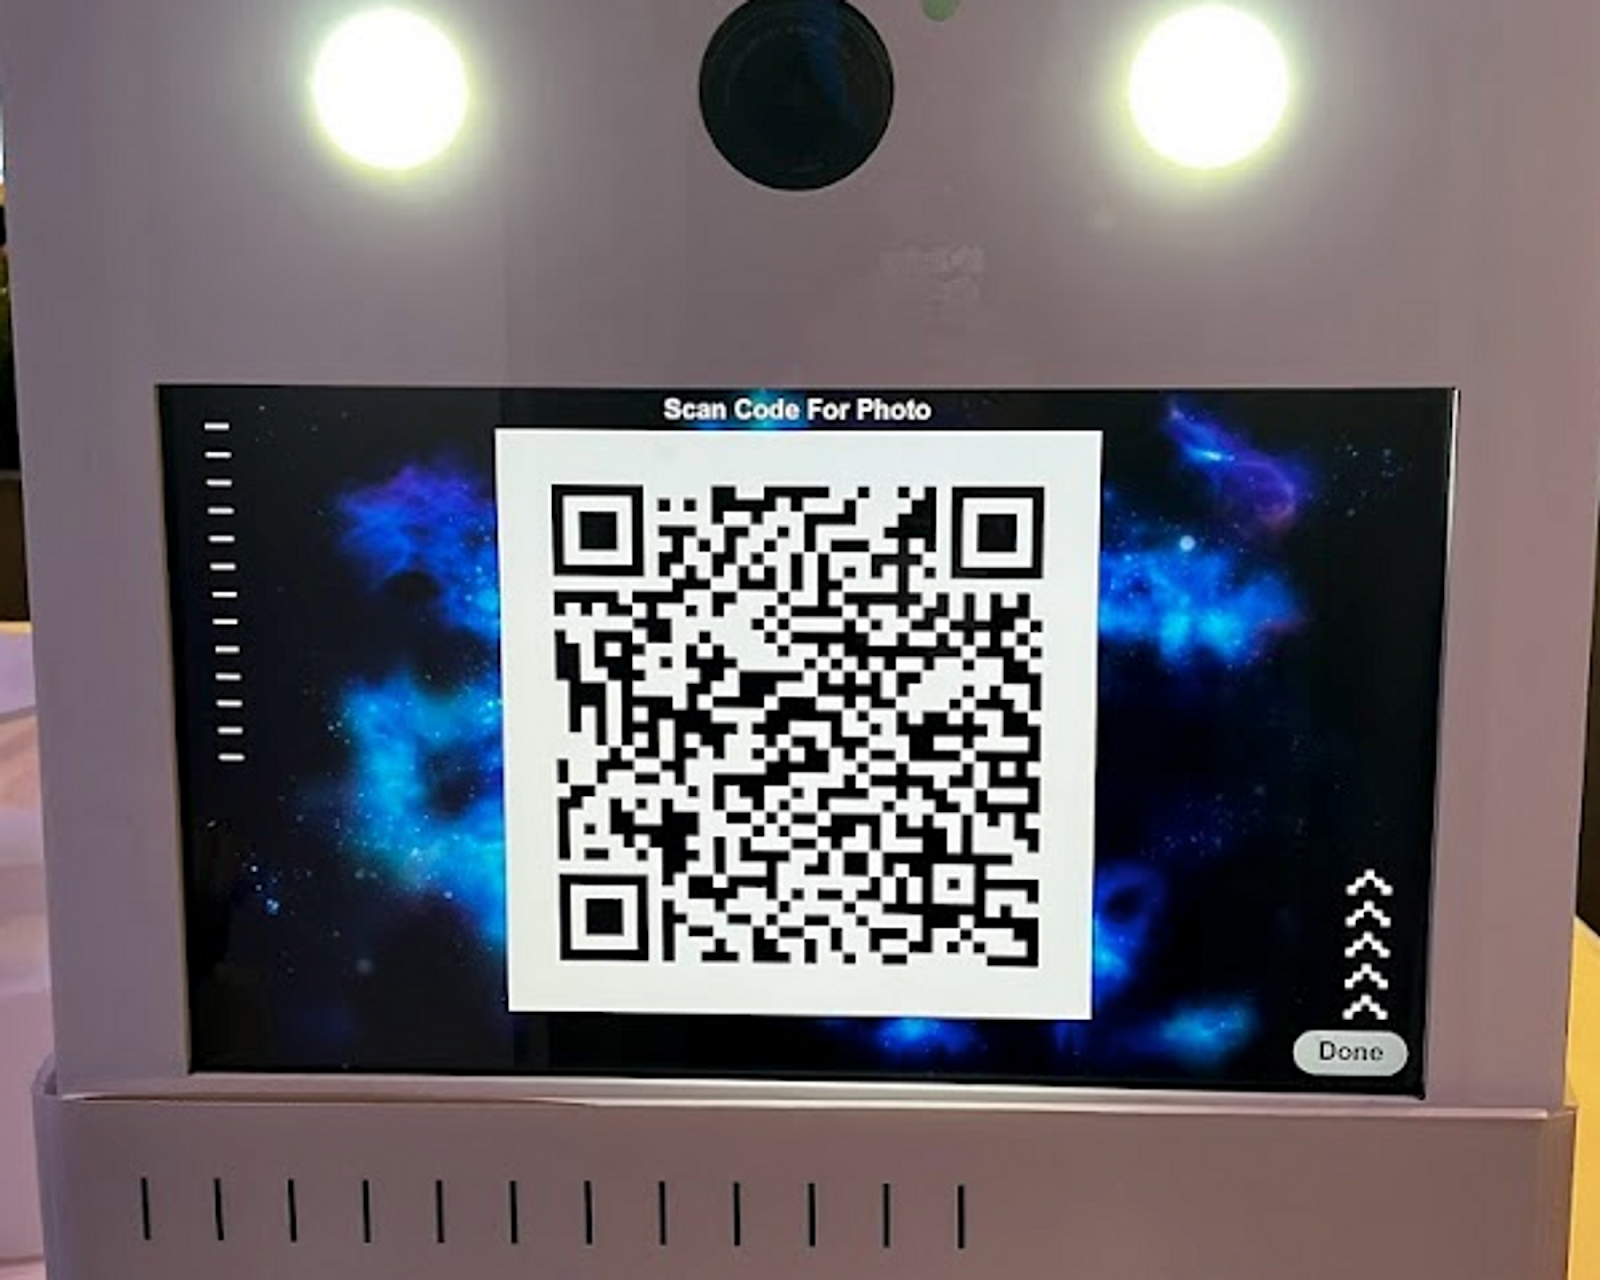 A QR code containing CID of a selfie